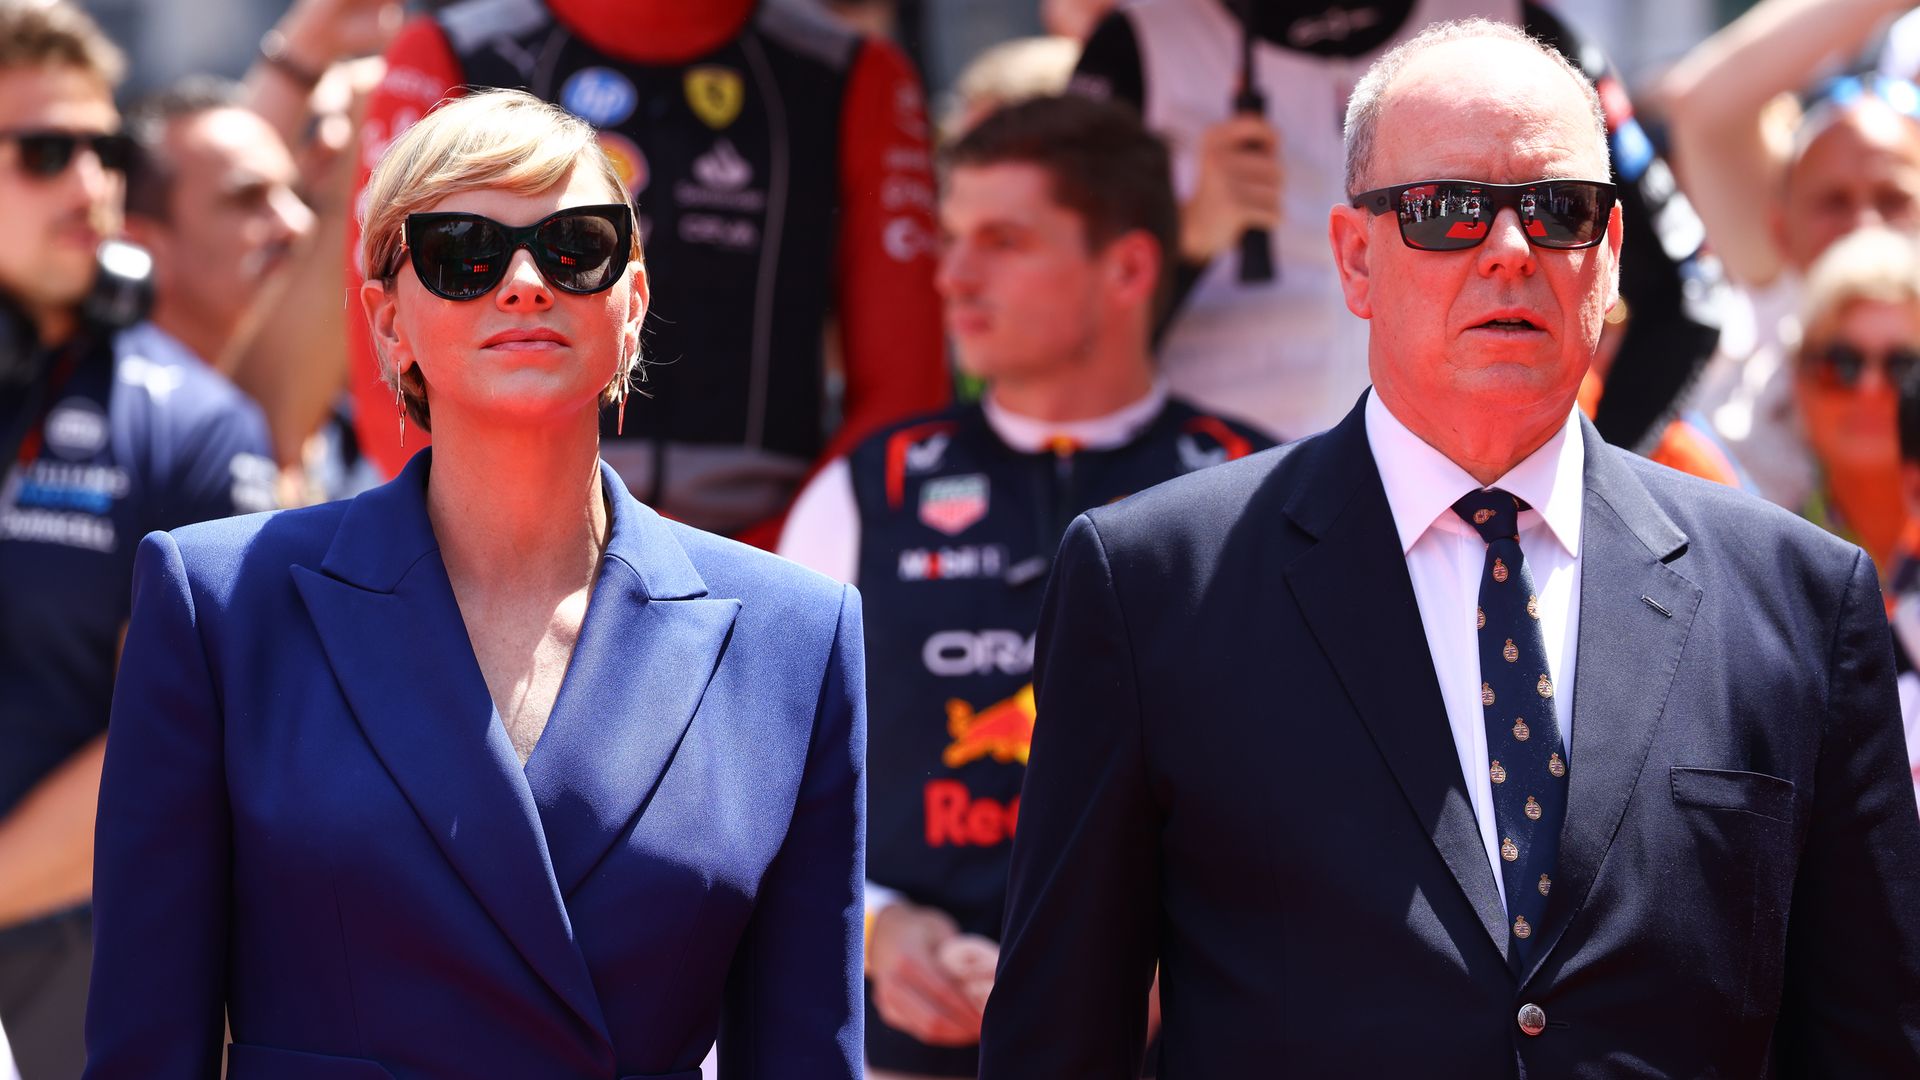 Princess Charlene wows in spectacular waist-cinching jumpsuit for rare public appearance with Prince Albert